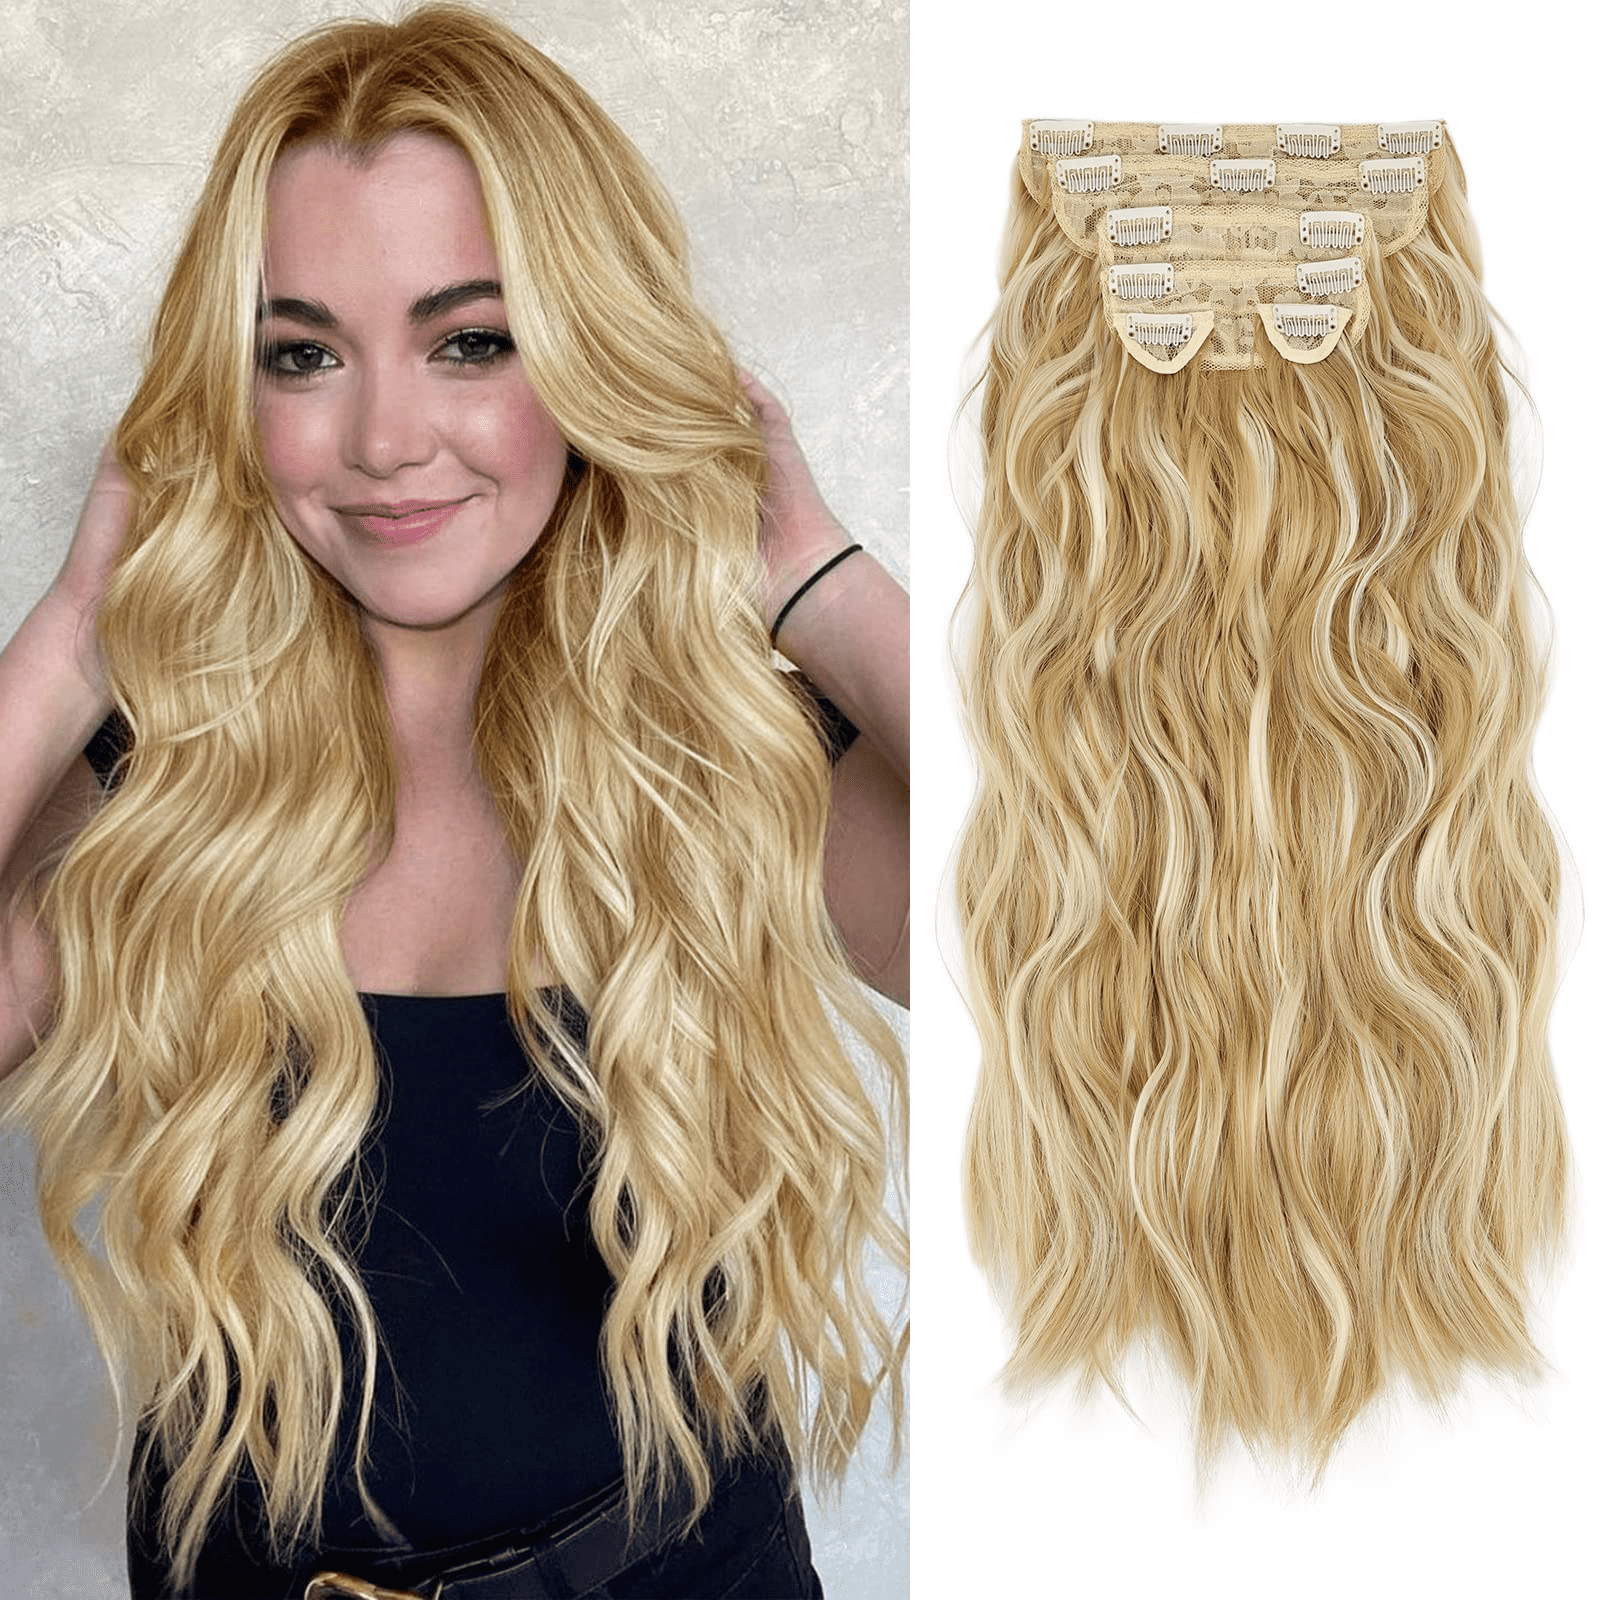 4PCS Clip in Hair Extensions Honey Blonde Mixed Light Brown 20 Inch Long  Wavy Synthetic Hair Extensions (4pcs, 20Inch, 22H10#) 20 Inch 22H10-Honey  Blonde Mixed Light Brown